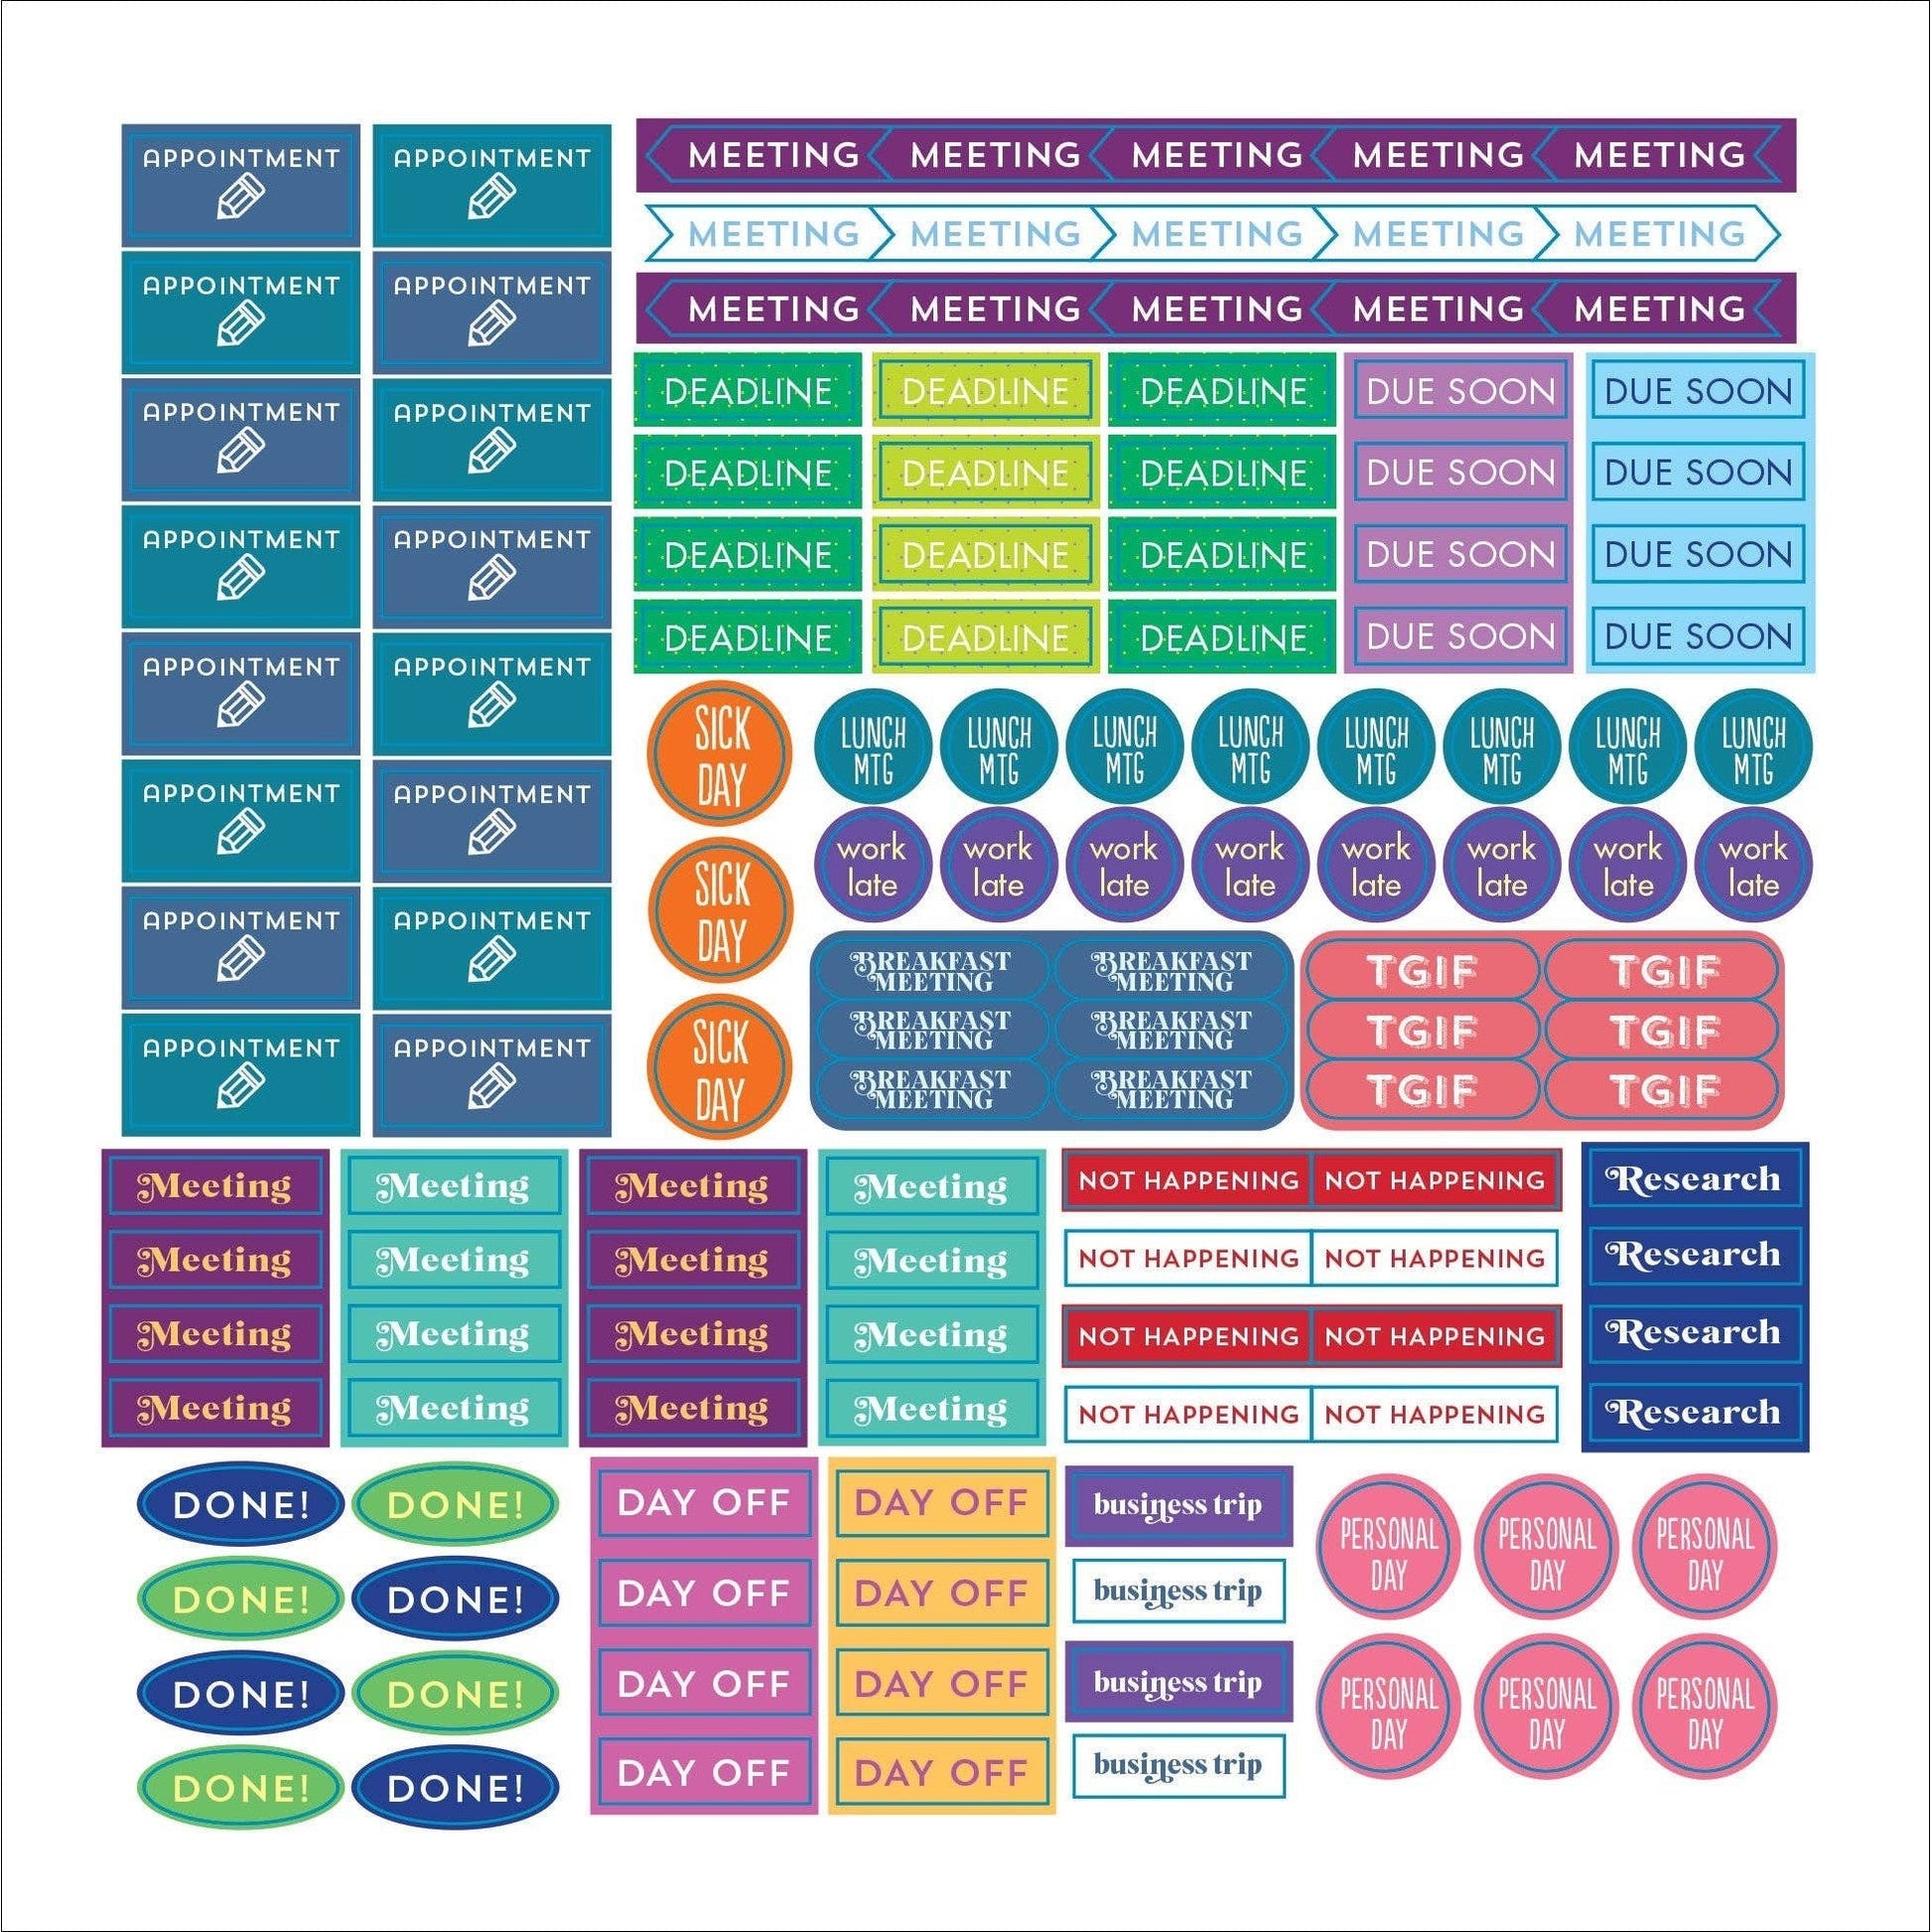 Plan It! A Sticker Book for All Your Productivity Needs | Decals Organizational Book